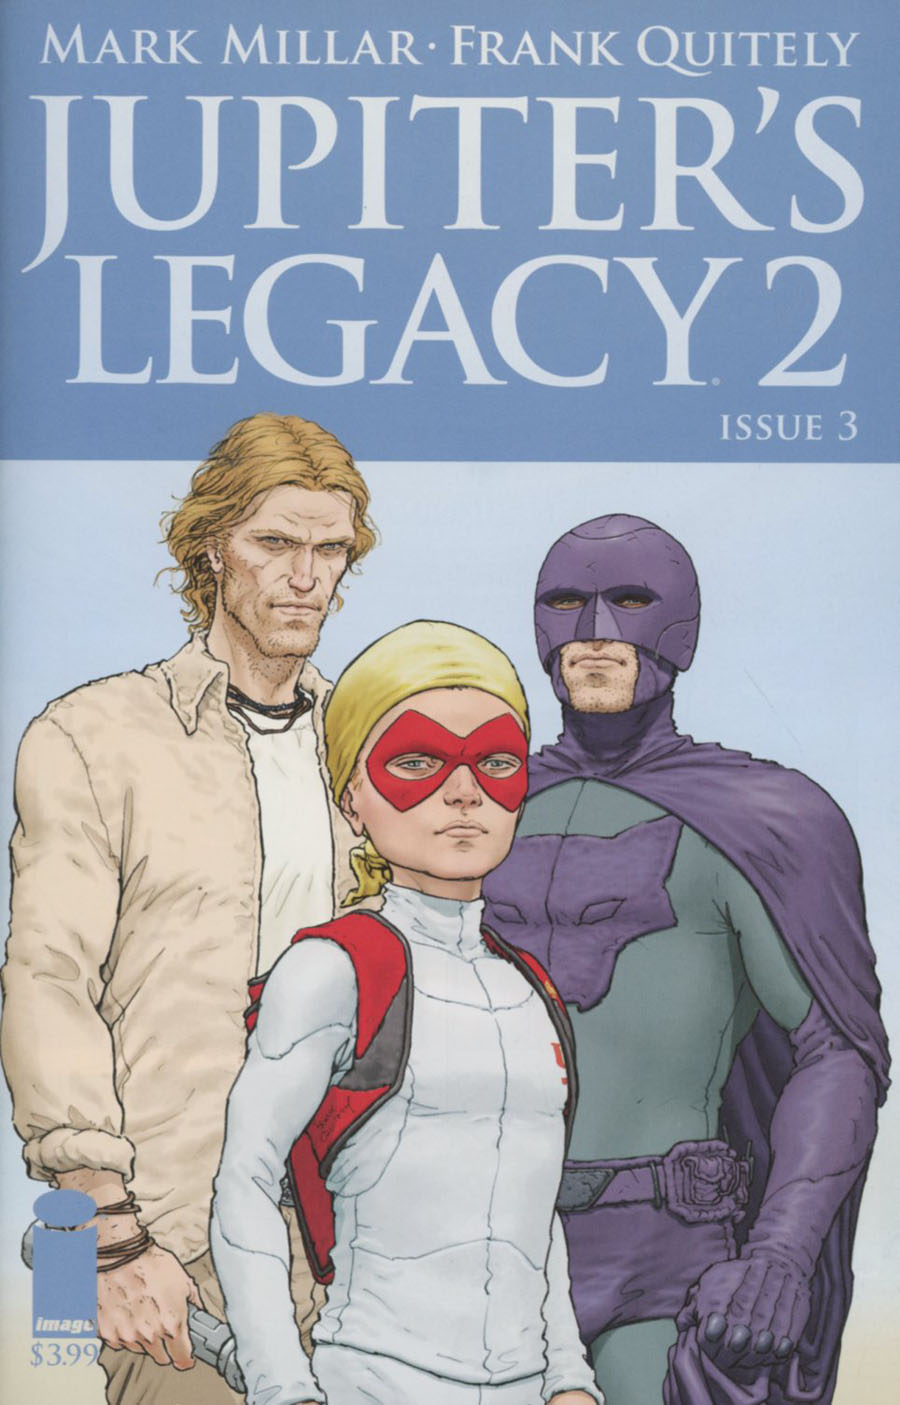 Jupiters Legacy Vol 2 #3 Cover A Regular Frank Quitely Cover